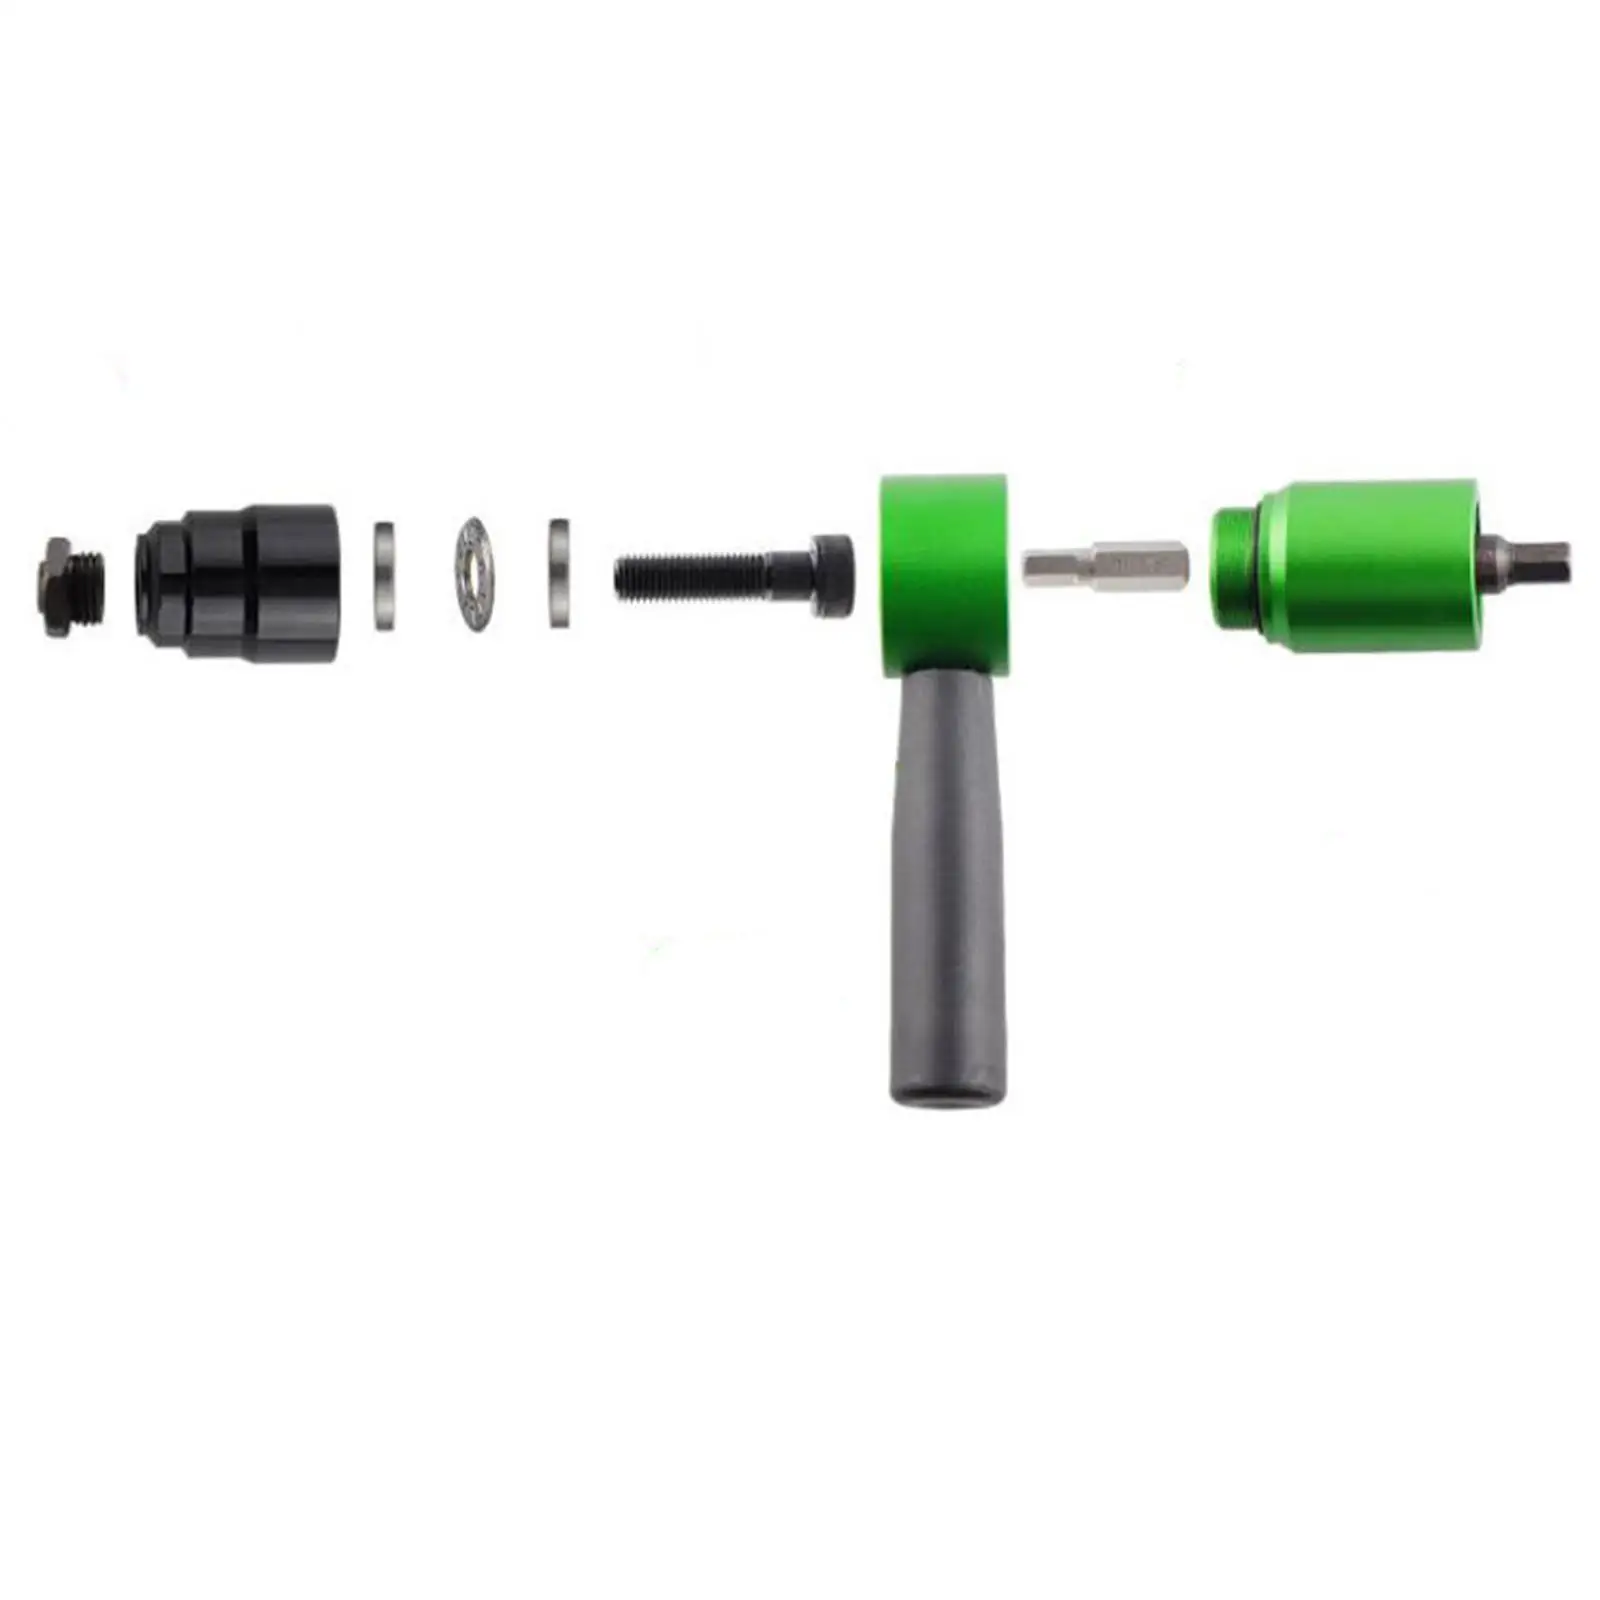 Electric Rivet Nut Drill Adaptor Set with Handle Wrench Alloy Insert Nut Riveting Tool for Cordless Electric Drill Rivet Nuts